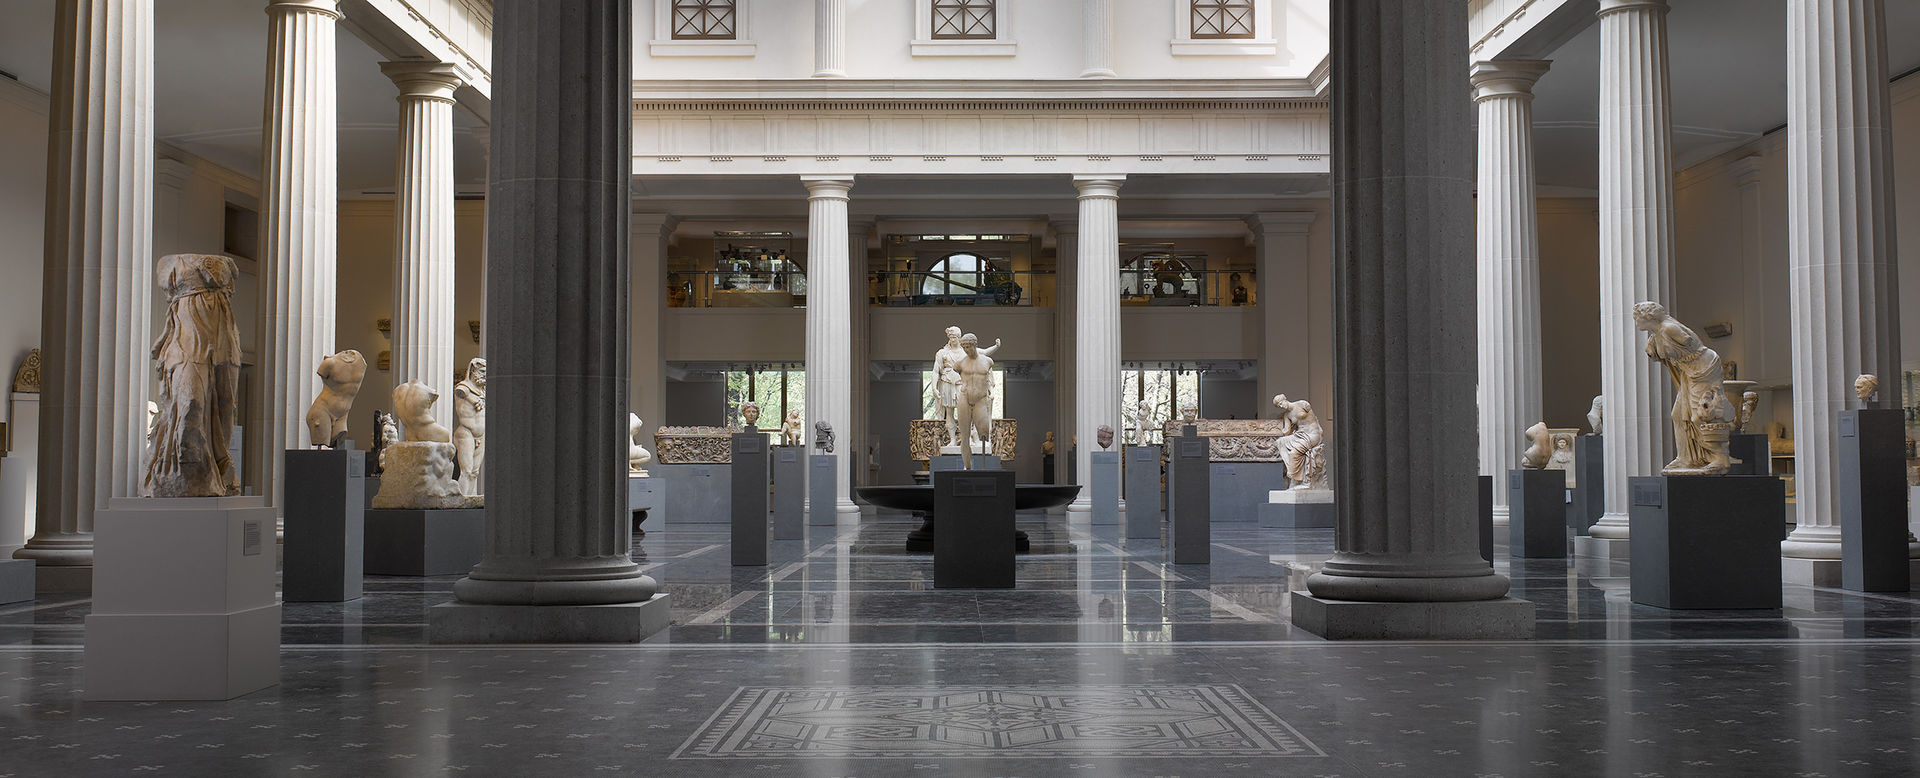 Ancient Greek Colonization and Trade and their Influence on Greek Art, Essay, The Metropolitan Museum of Art